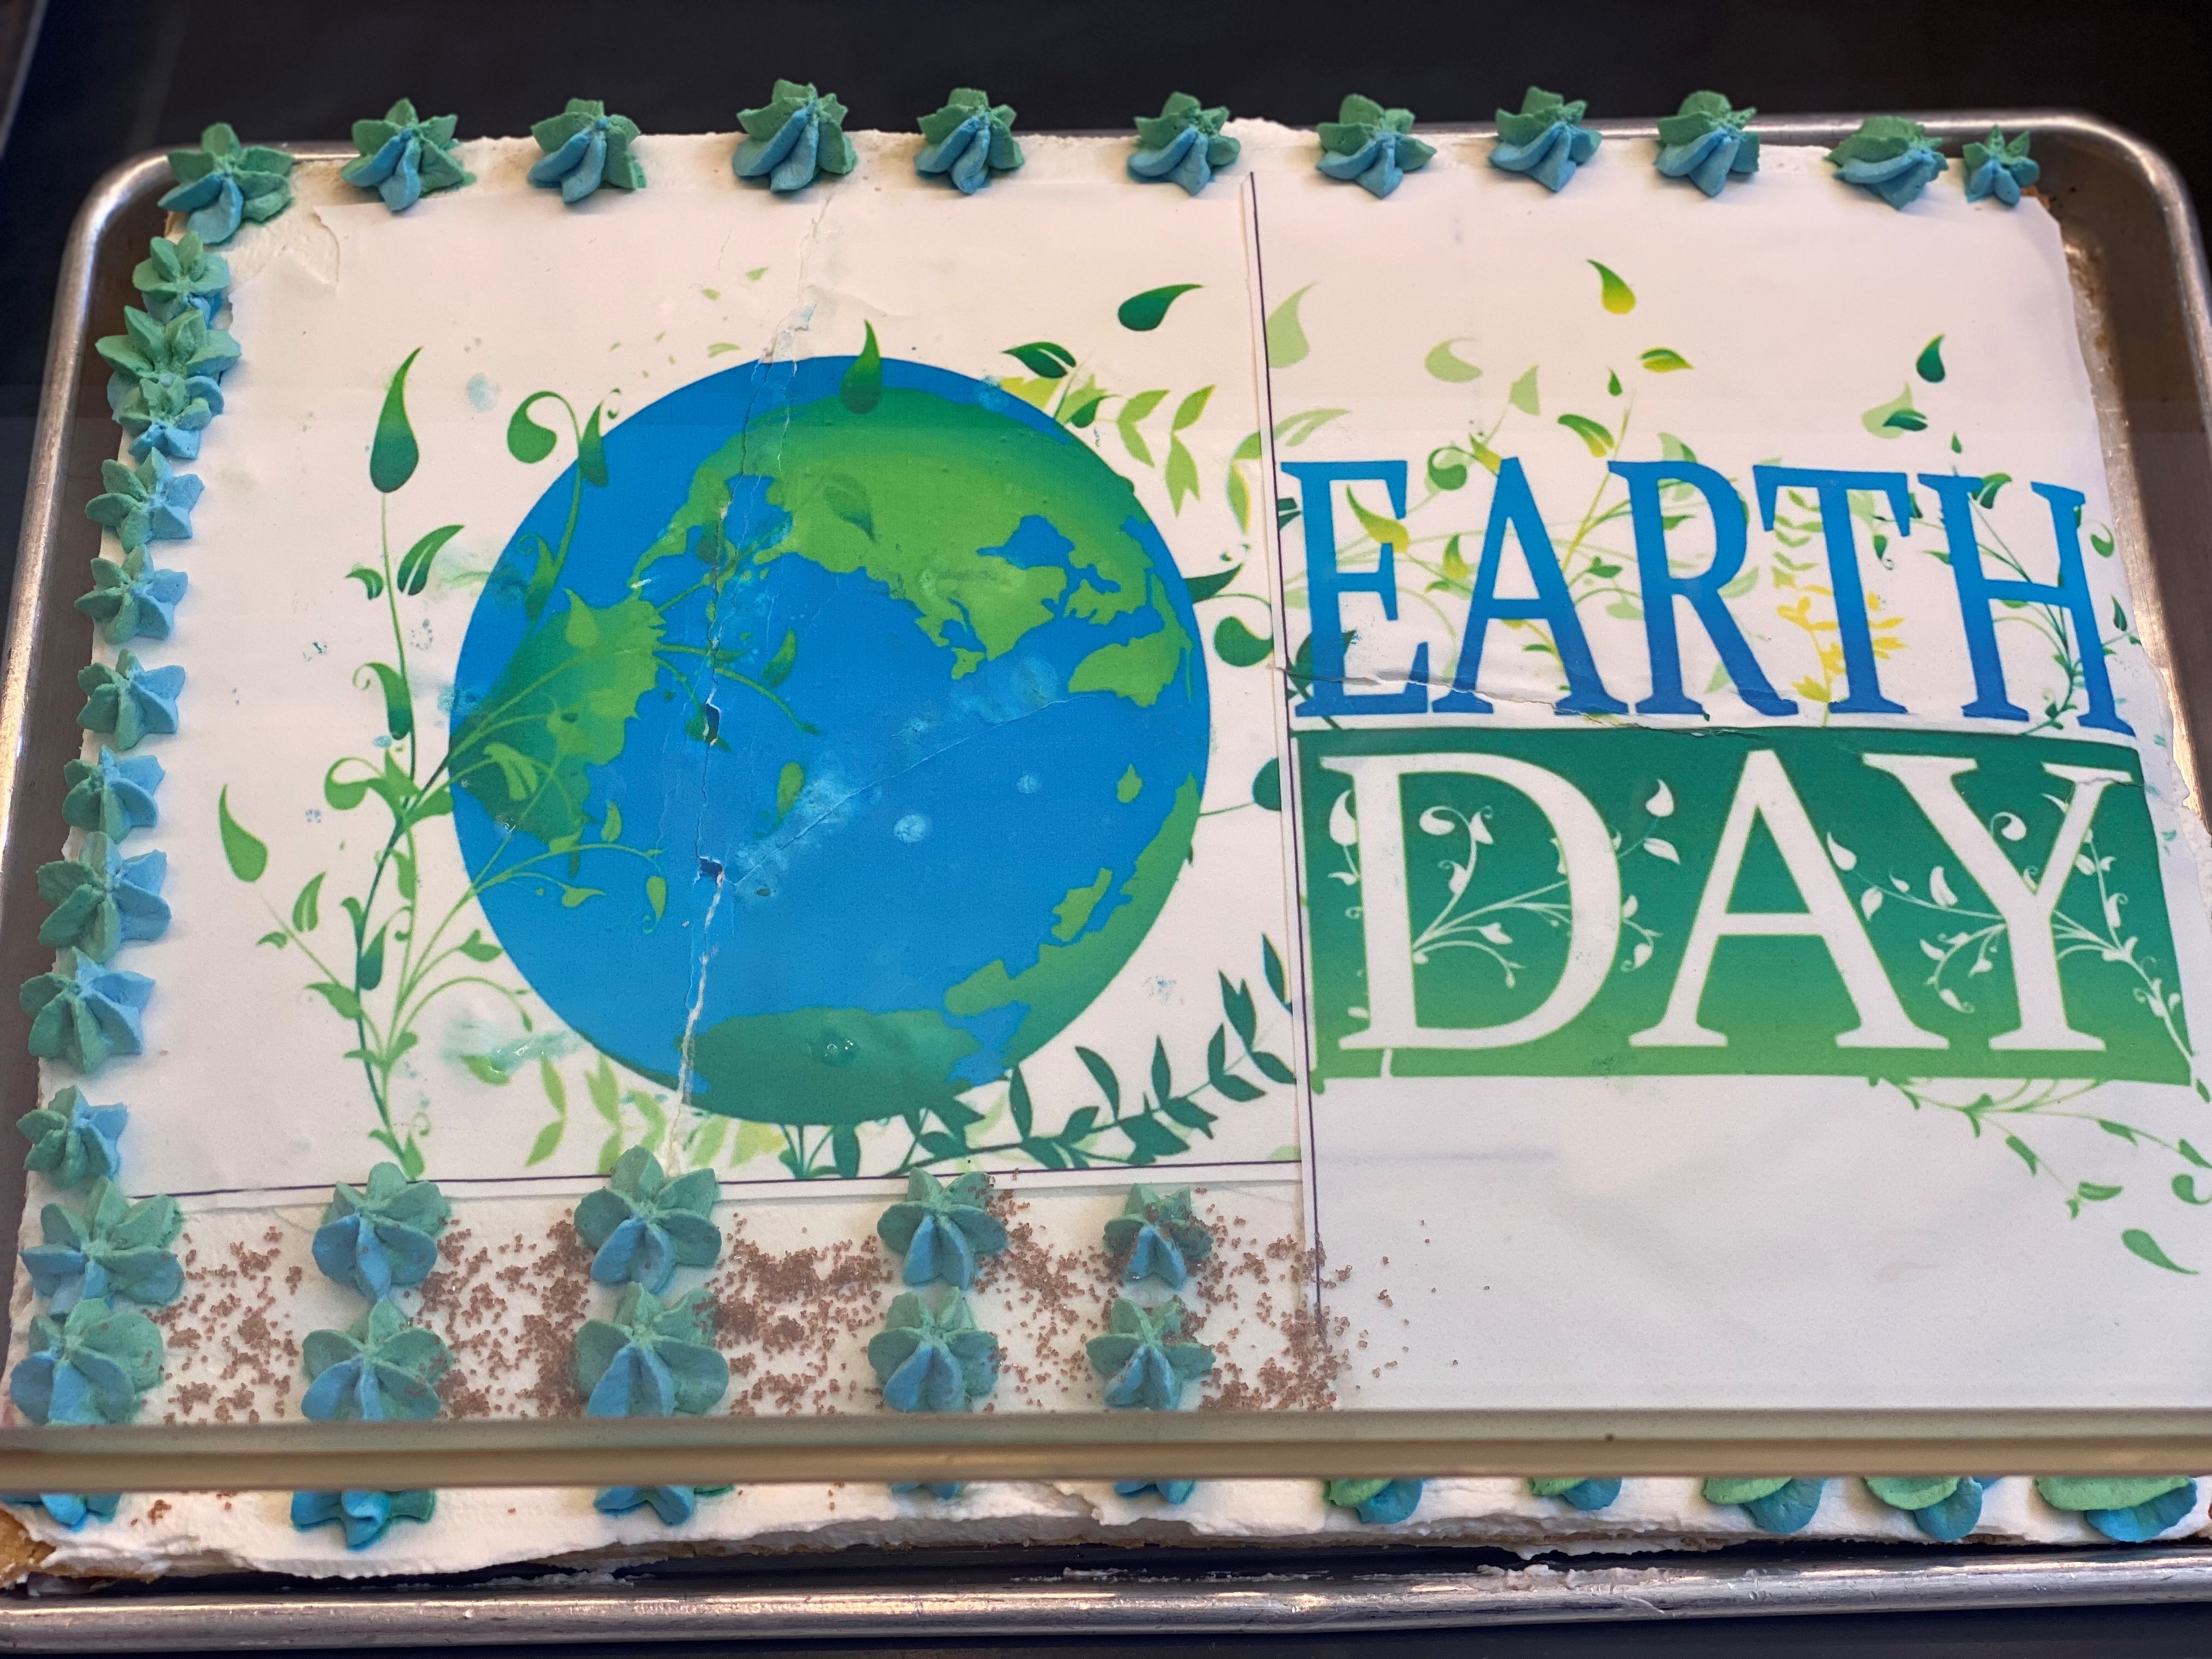 <span  class="uc_style_uc_tiles_grid_image_elementor_uc_items_attribute_title" style="color:#ffffff;">Earth Day</span>